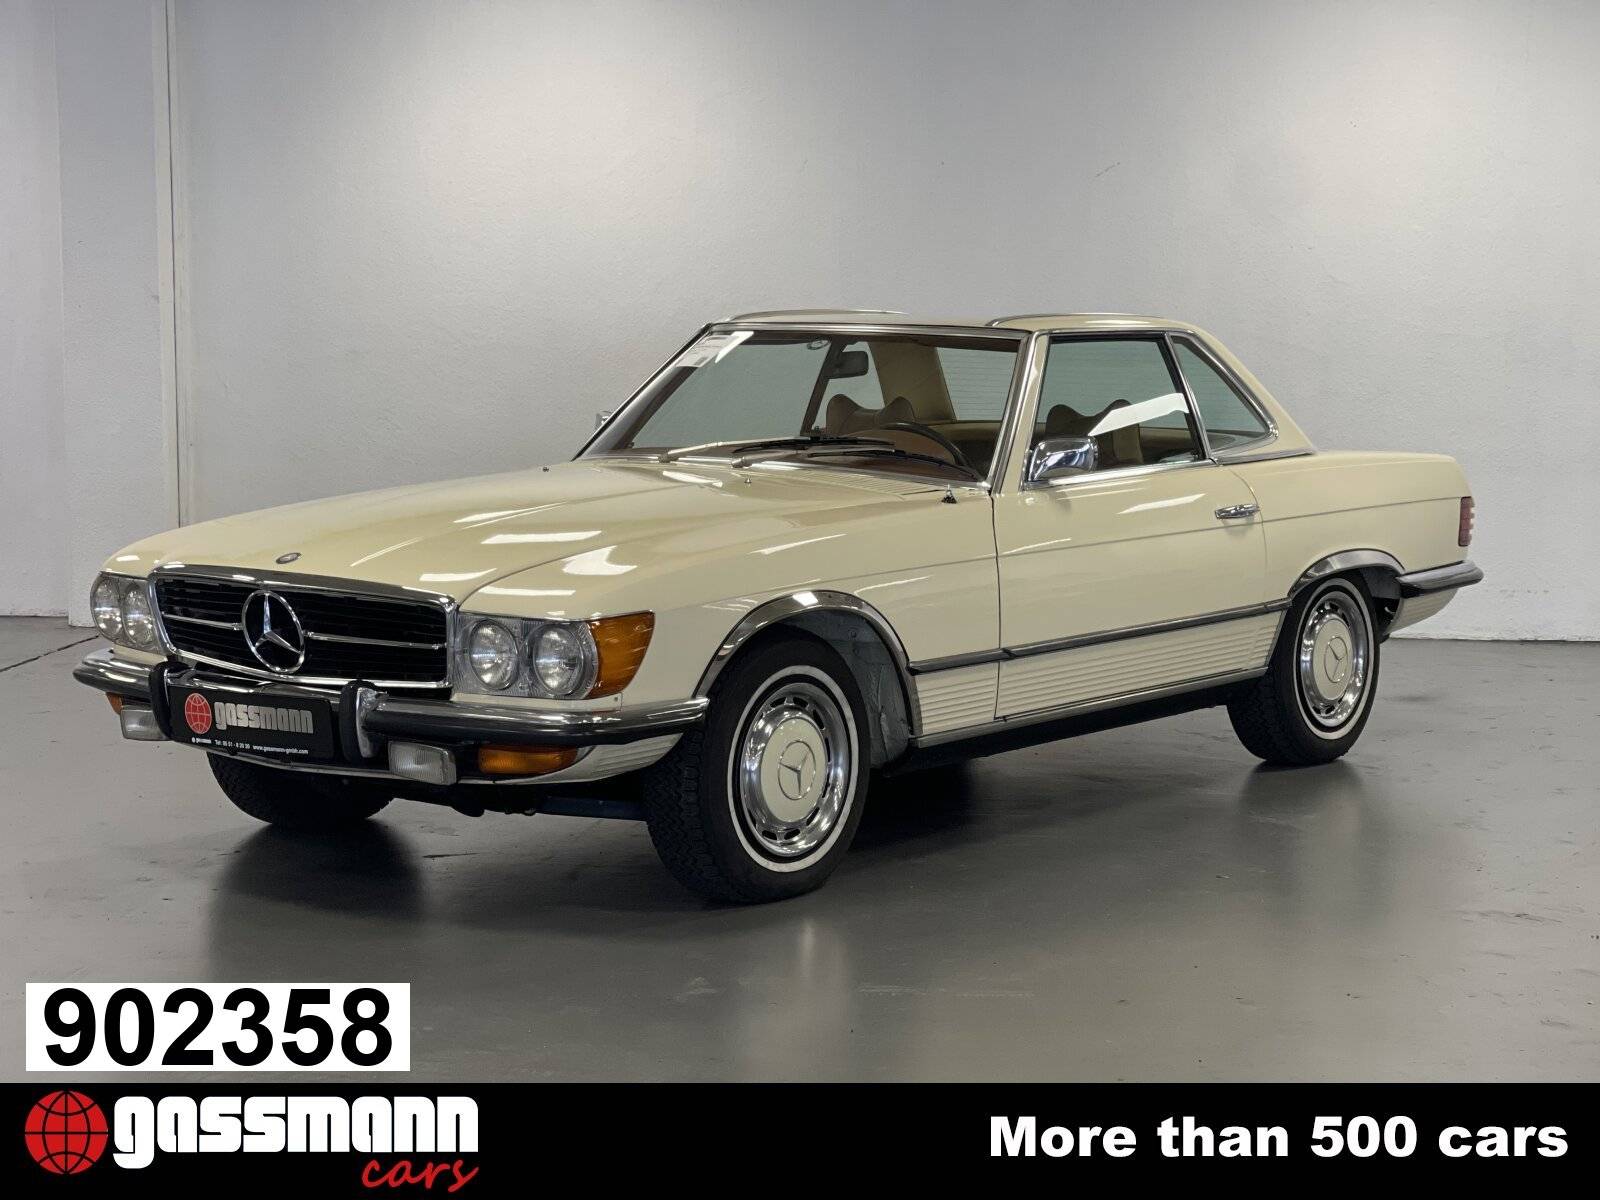 For Sale: Mercedes-Benz 450 Sl (1972) Offered For £18,222